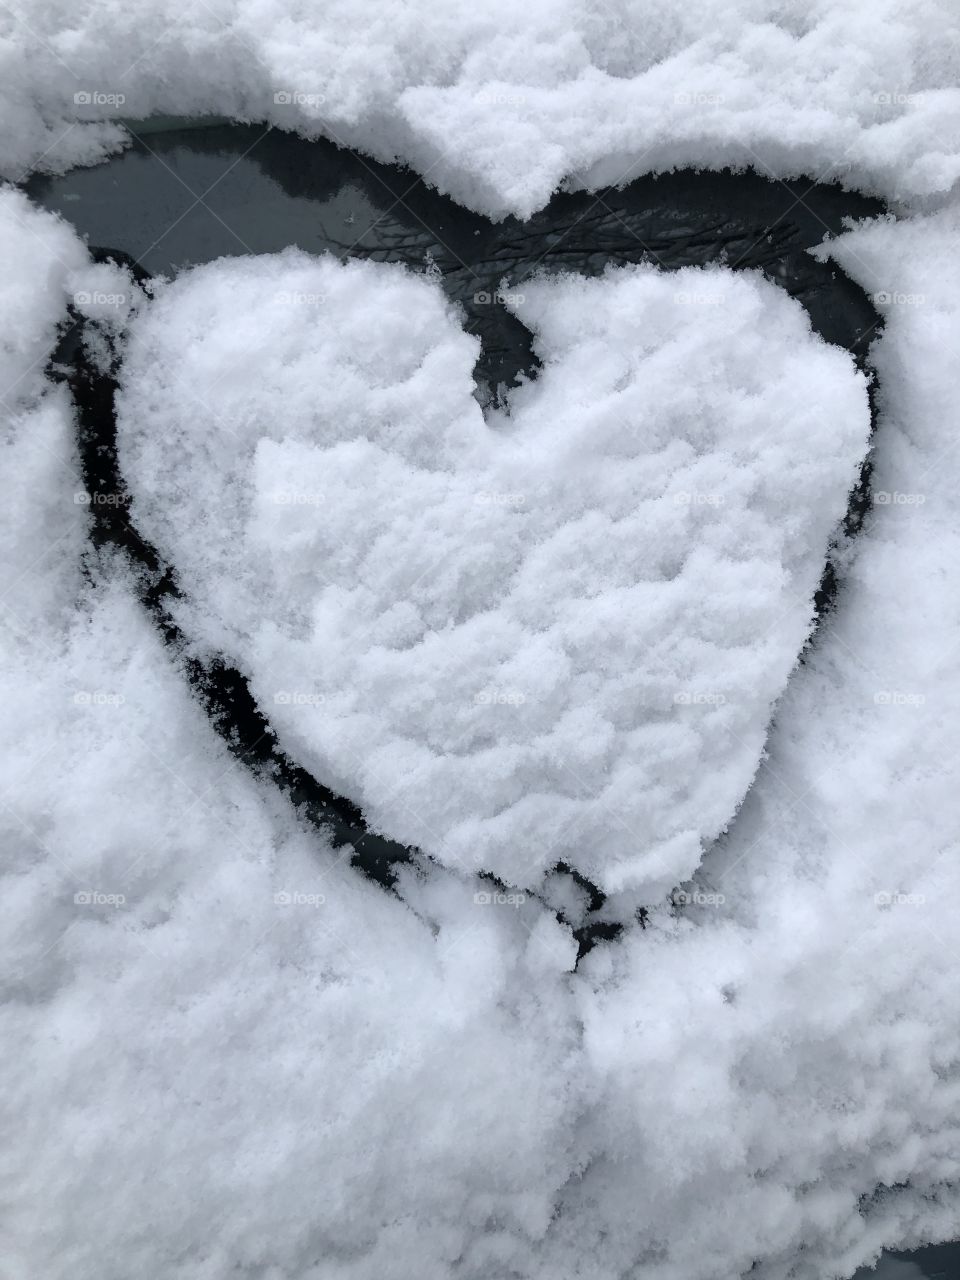  Heart in the snow